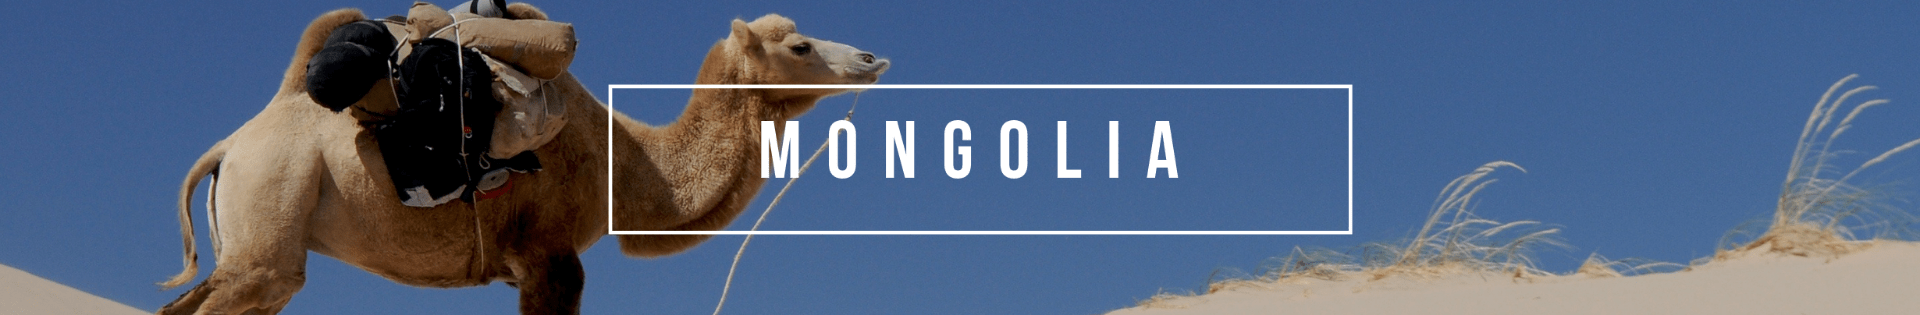 banner with stock image of a camel; text: Mongolia